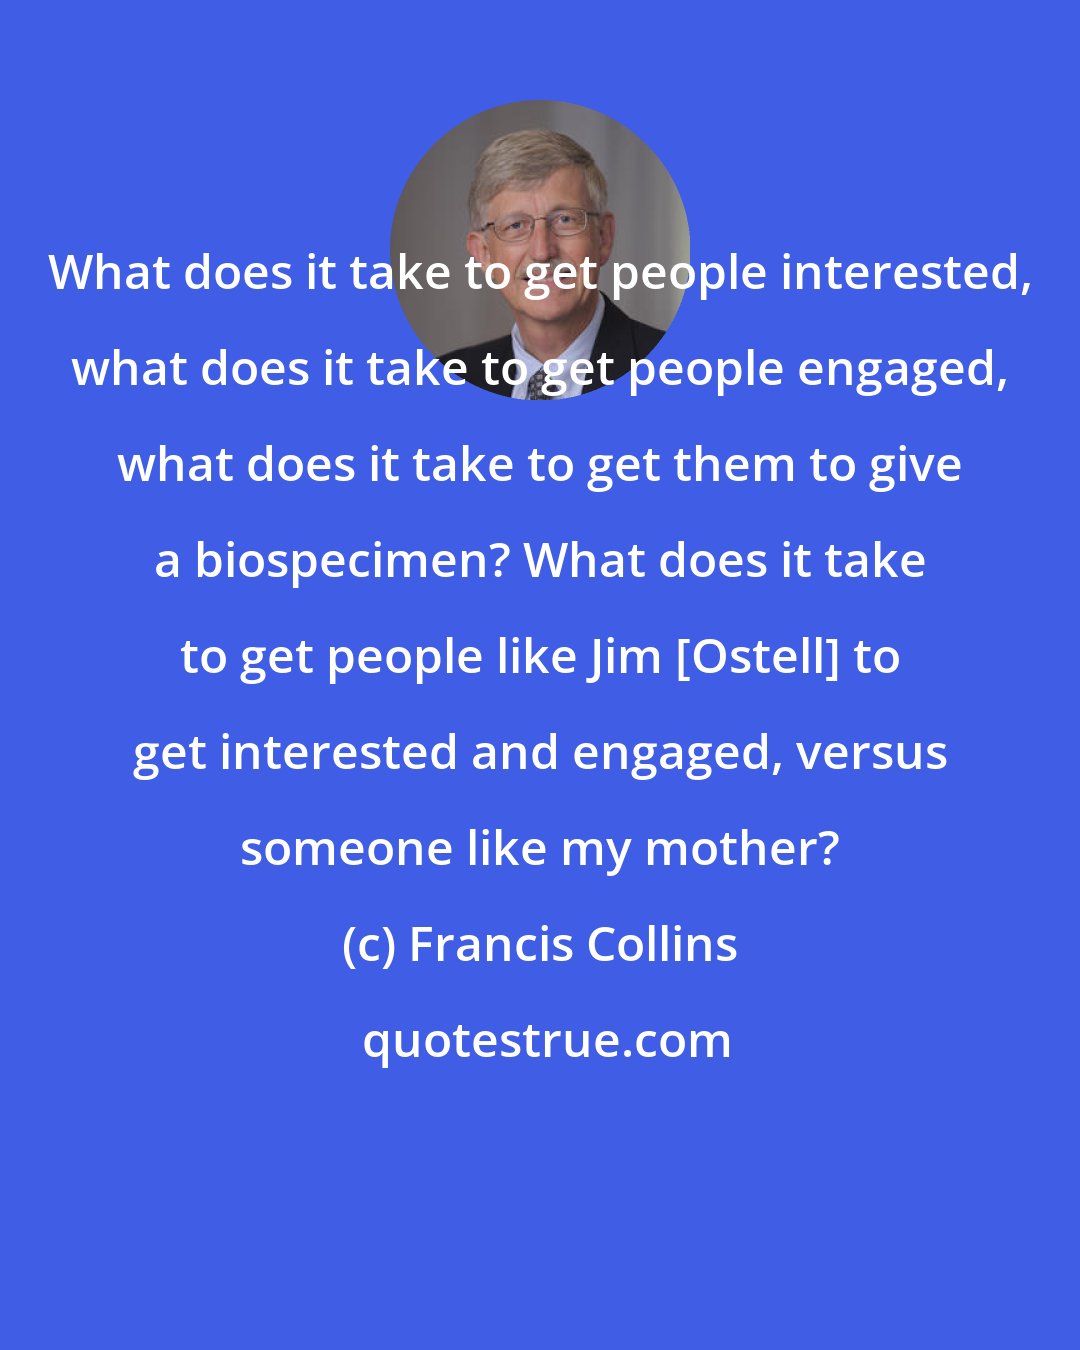 Francis Collins: What does it take to get people interested, what does it take to get people engaged, what does it take to get them to give a biospecimen? What does it take to get people like Jim [Ostell] to get interested and engaged, versus someone like my mother?